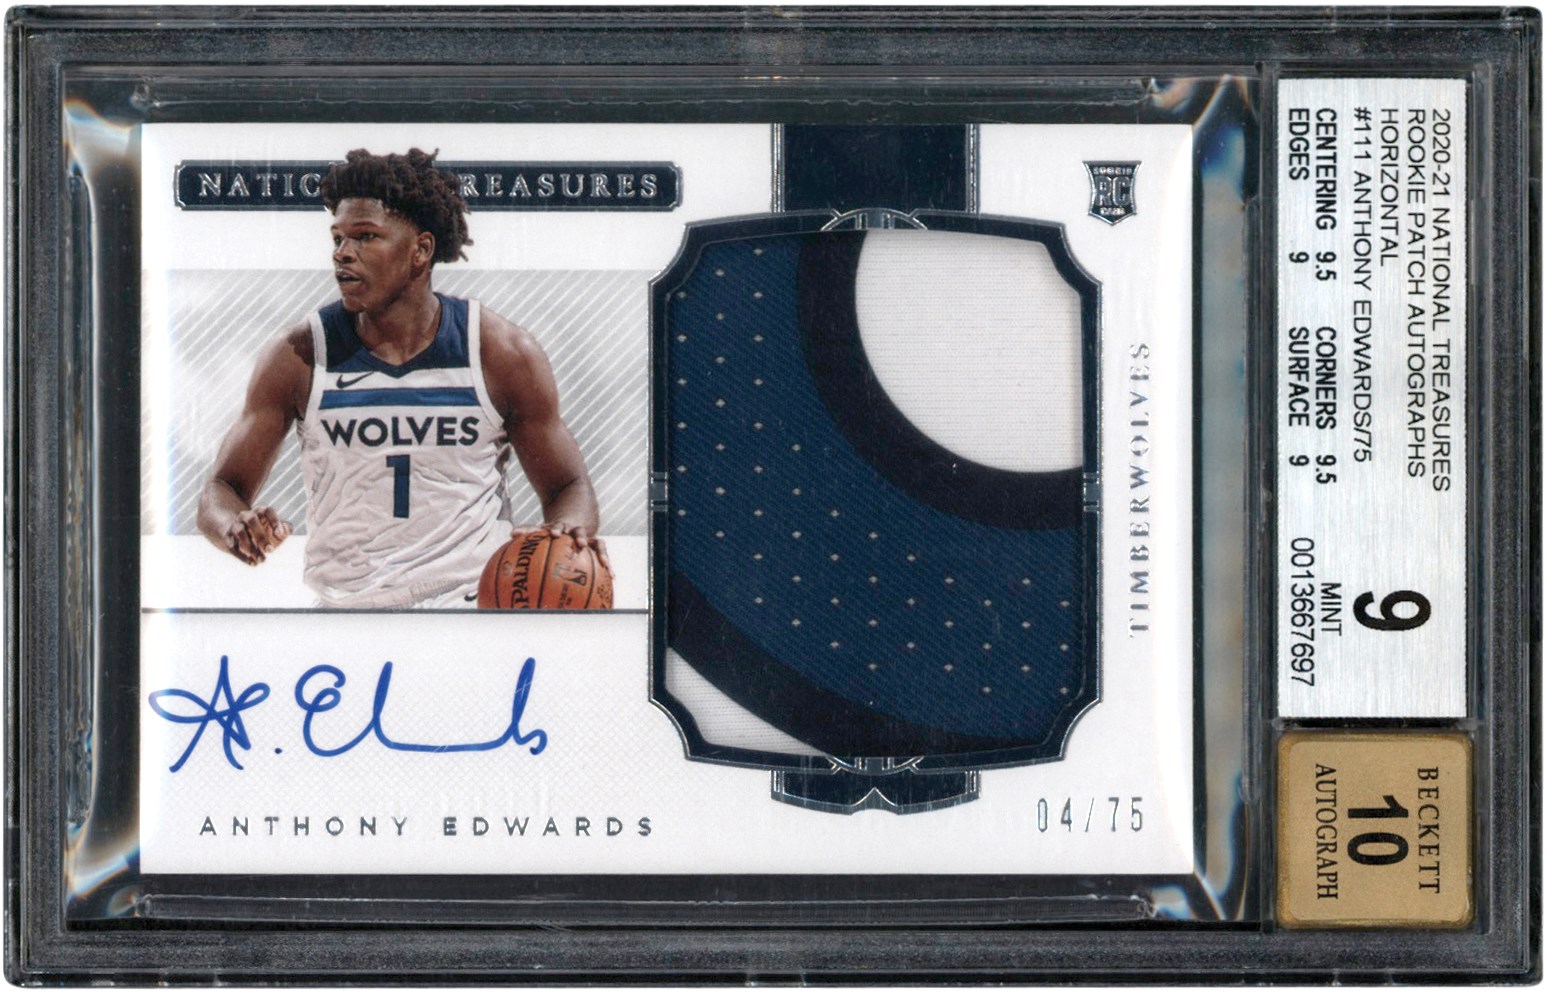 - 2020-2021 National Treasures Basketball Rookie Patch Autographs Horizontal #111 Anthony Edwards Card #4/75 BGS MT 9 Auto 10